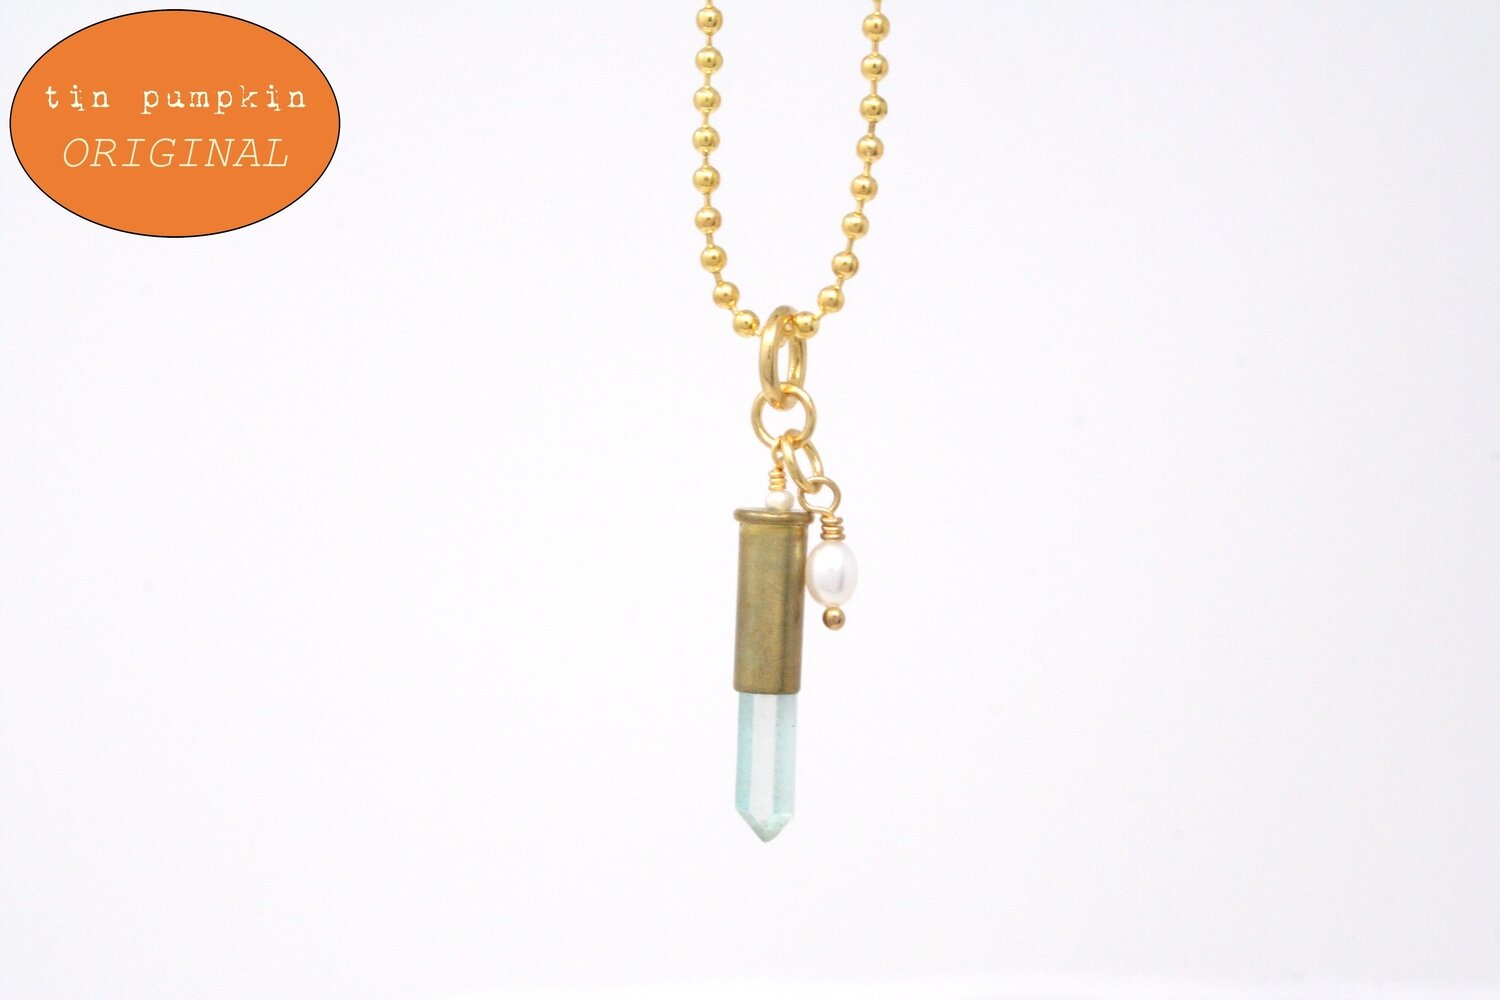 22-Caliber Brass Bullet Casing Necklace with Pale Blue Quartz Crystal - 24" chain